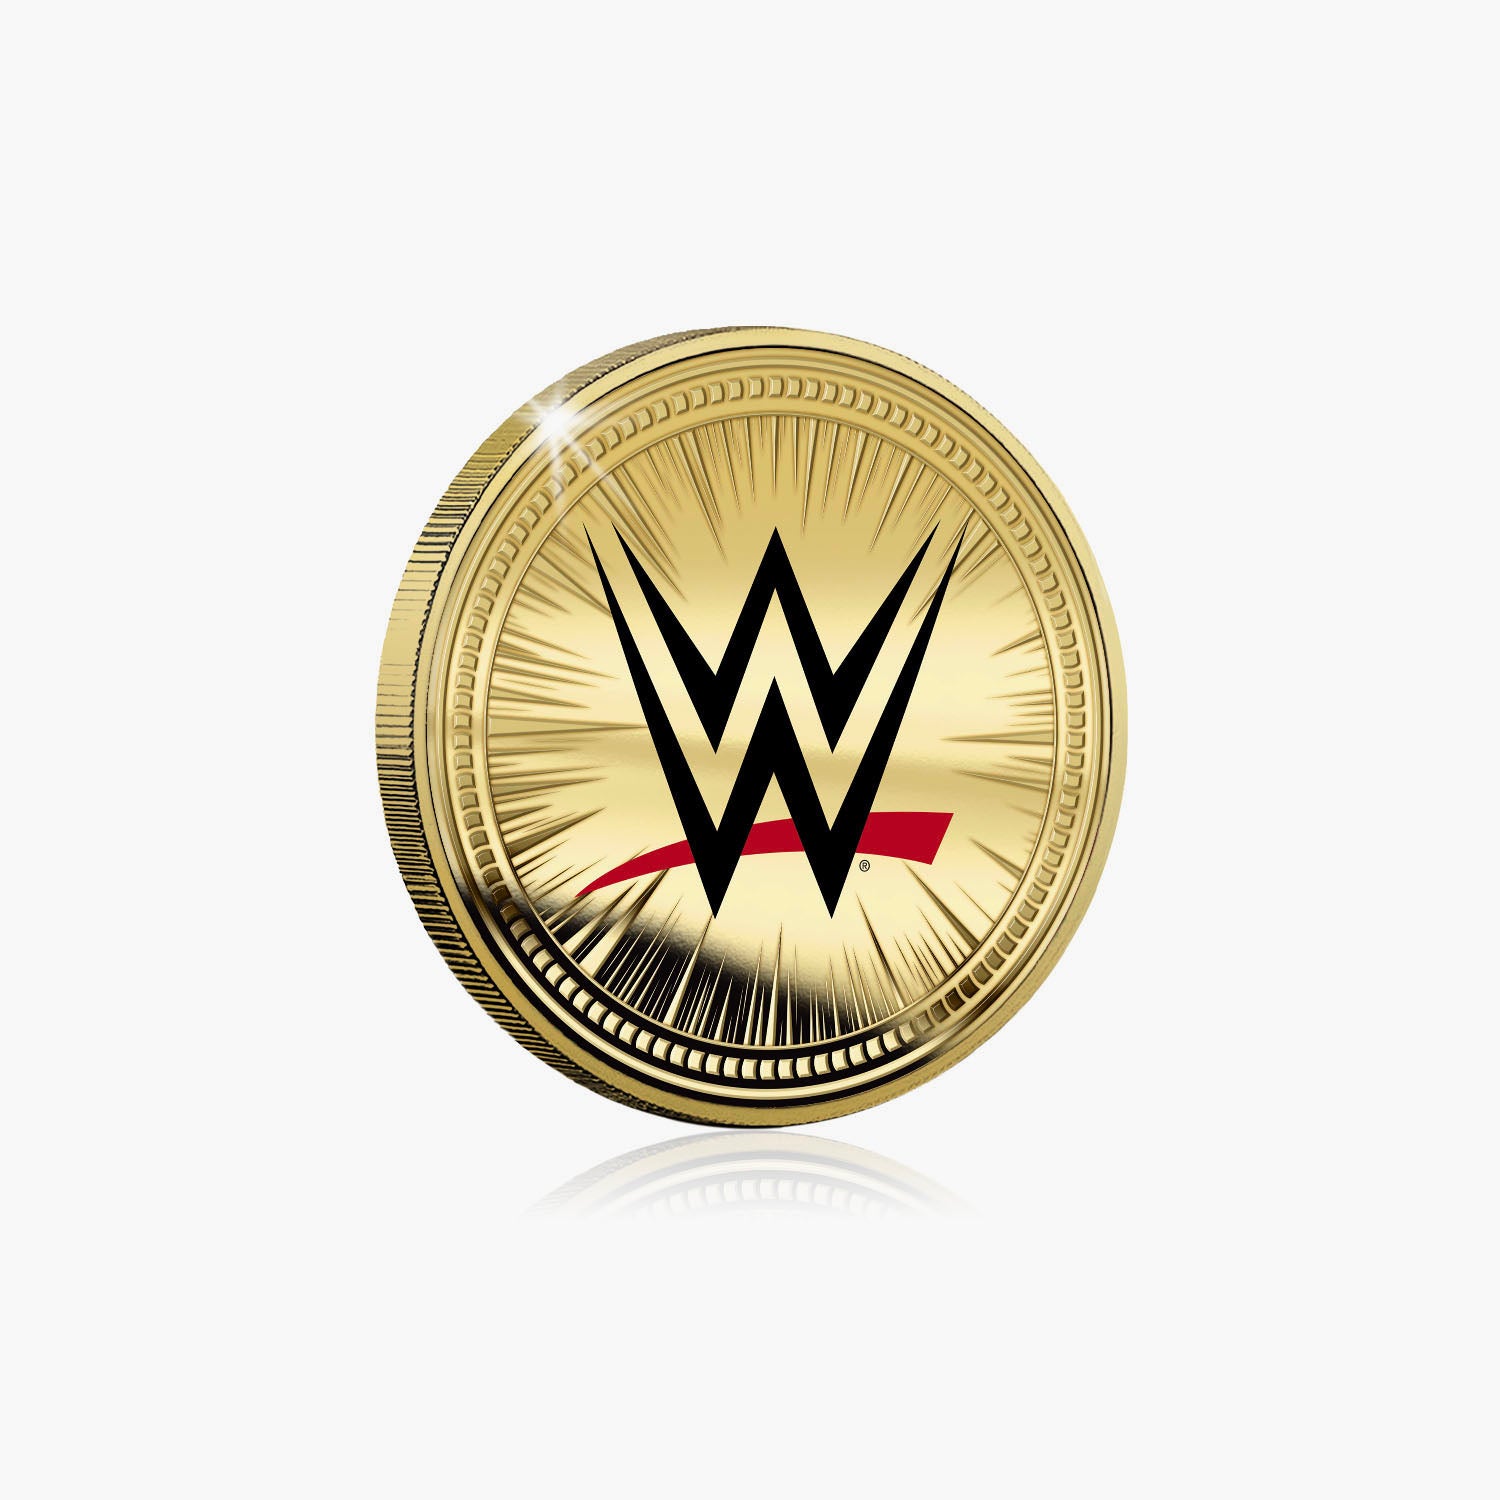 WWE Clash at the Castle Super Size Gold Luxe Edition